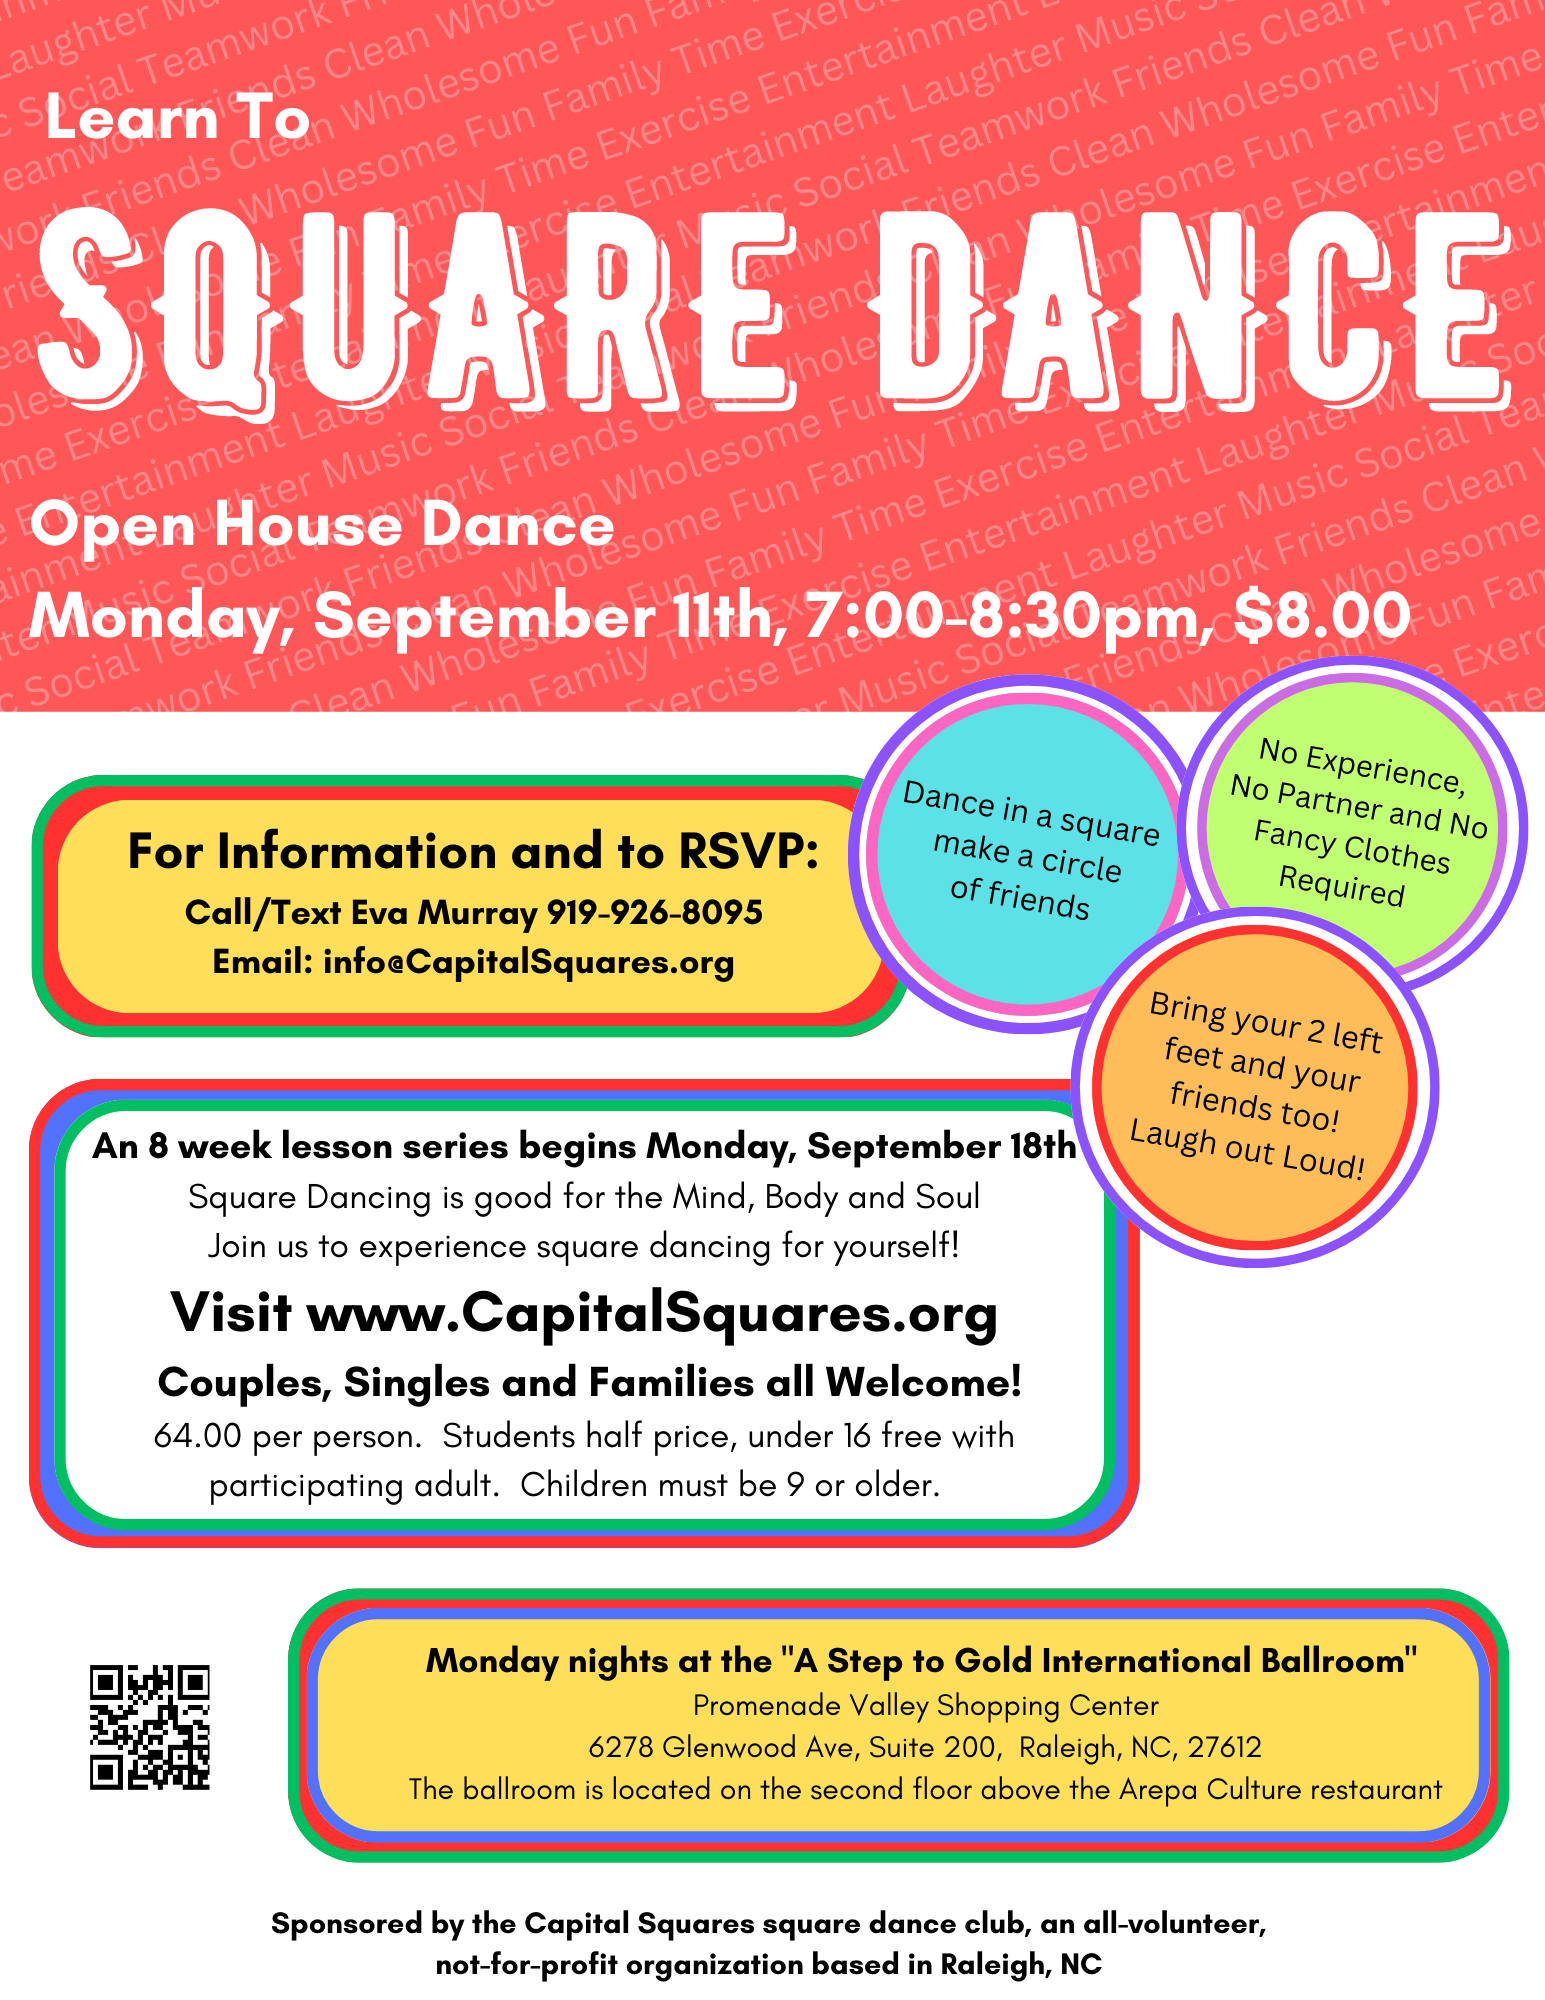 Learn to Square Dance, Raleigh, NC